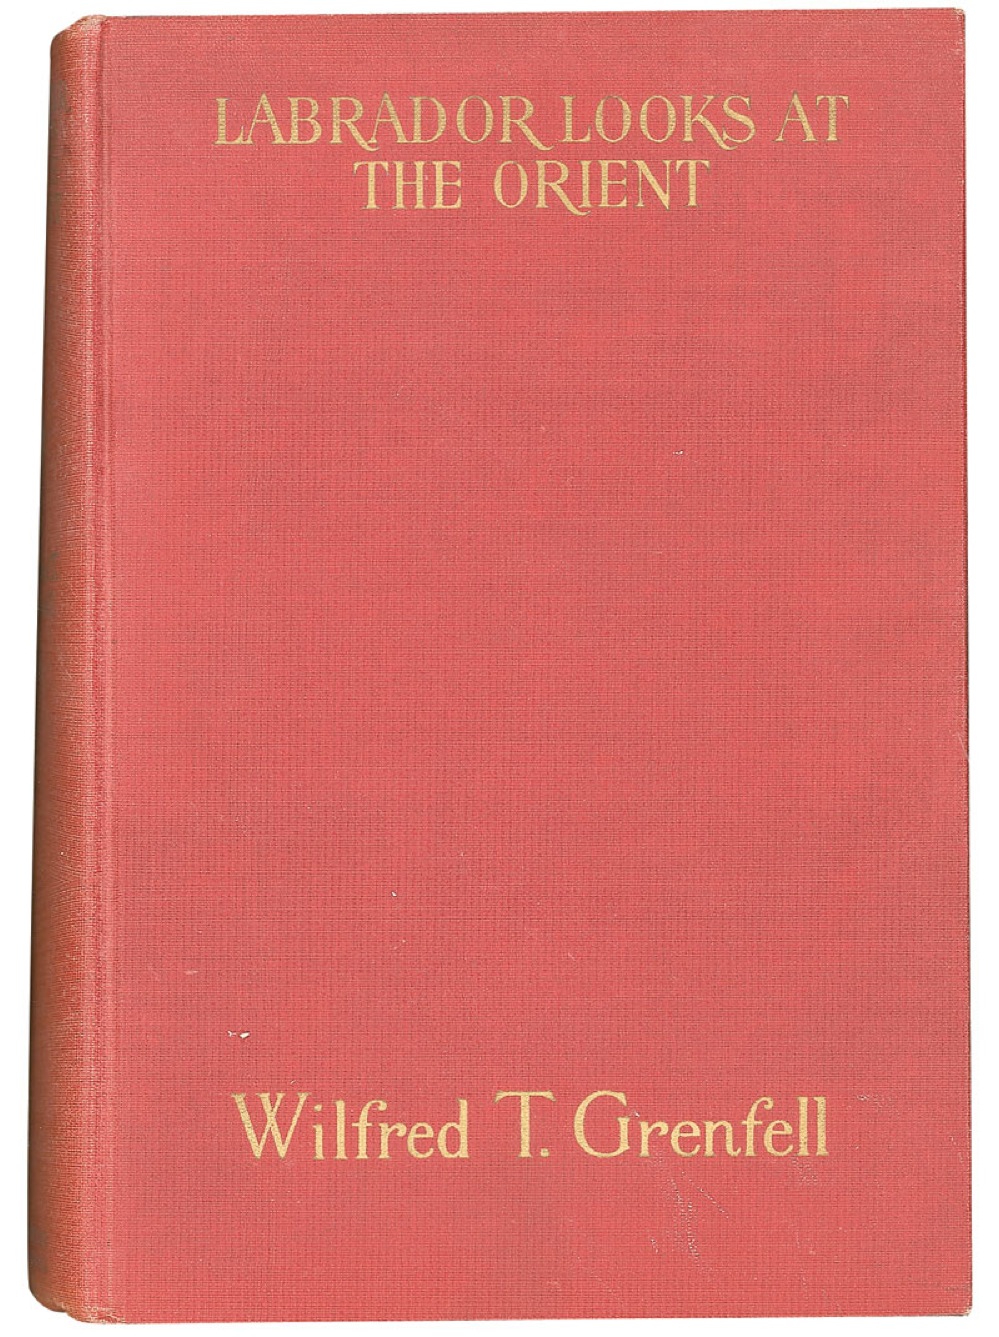 Lot #266 Wilfred T. Grenfell